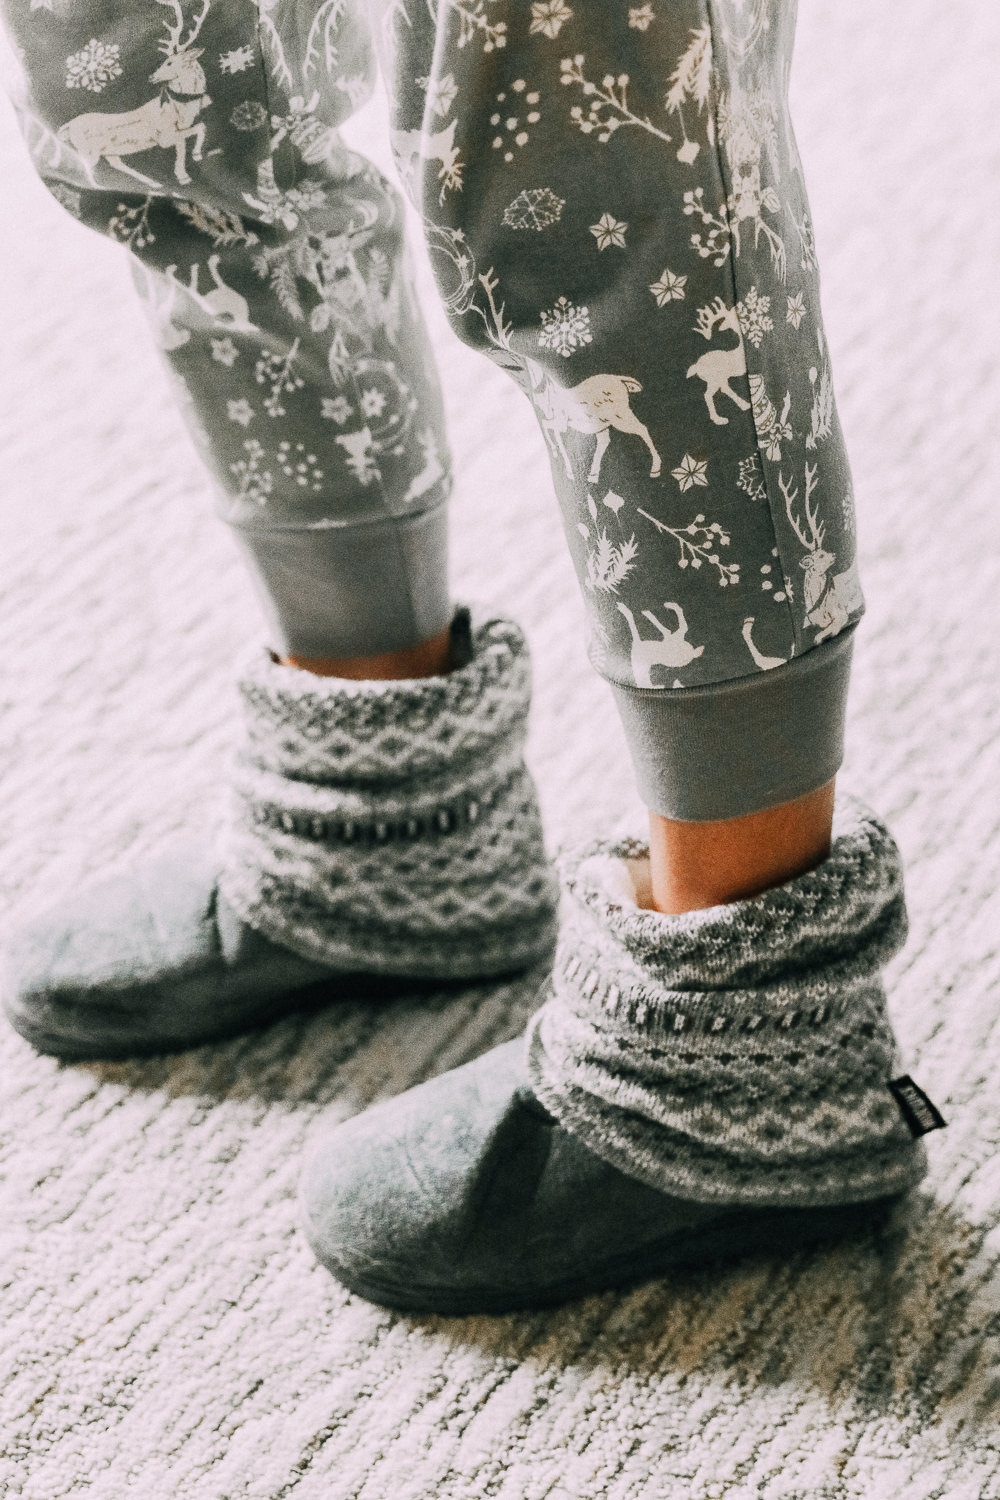 Holiday gifts from JCPenney featuring gray Muk Luk slipper boots from JCPenney